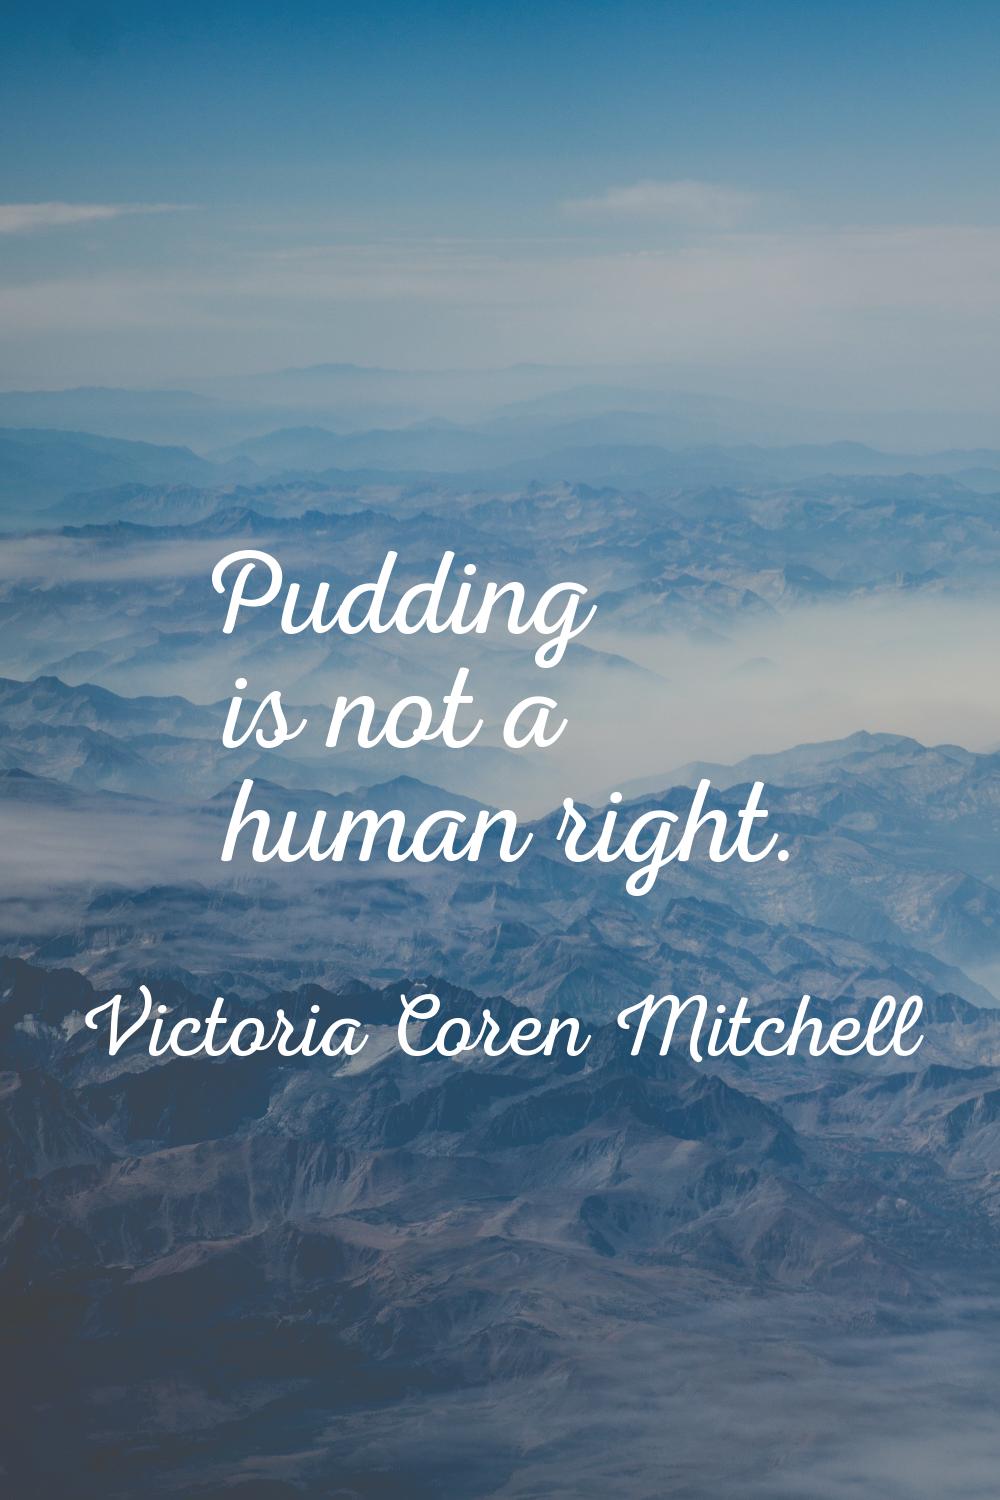 Pudding is not a human right.